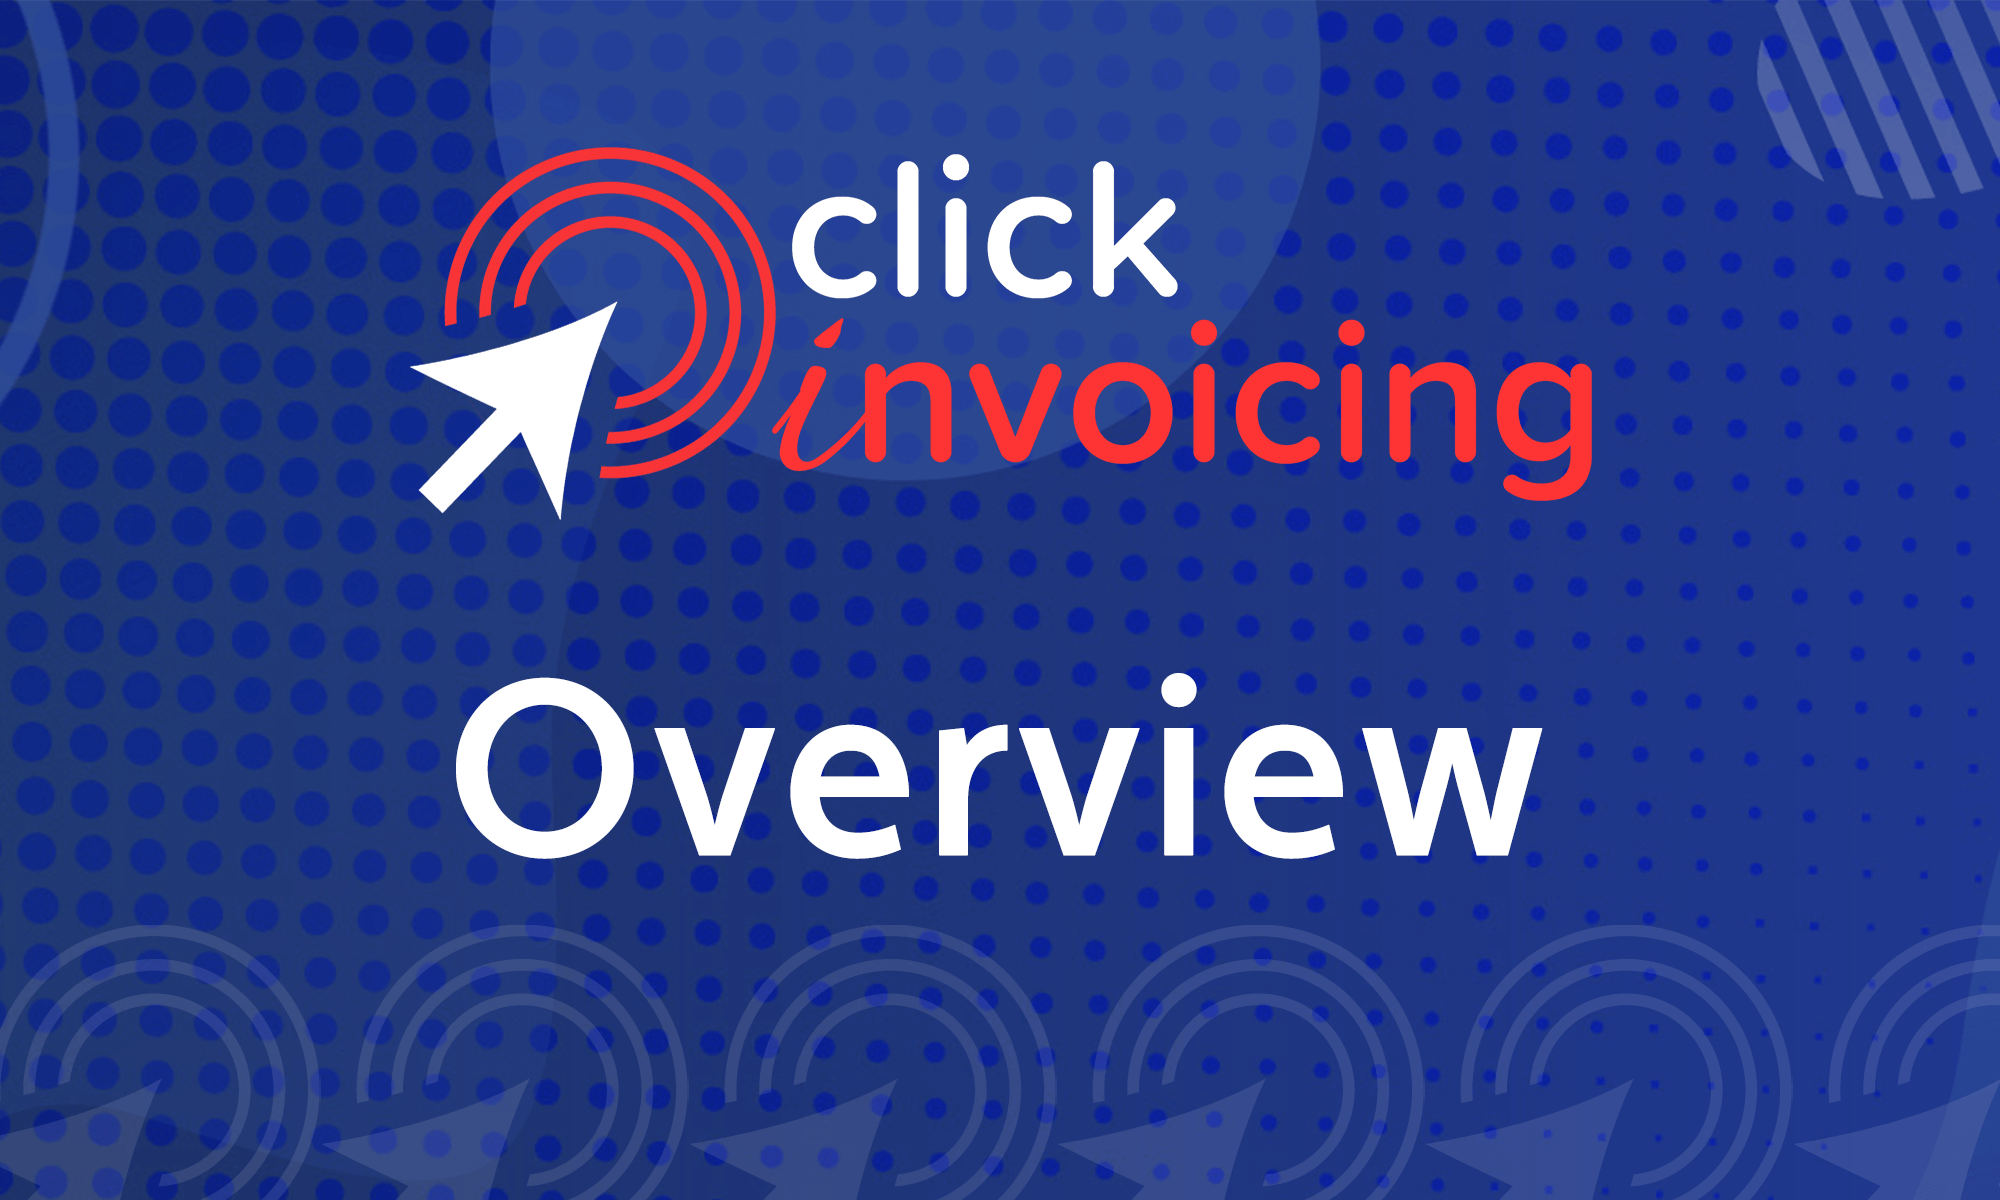 Featured image for “Click Invoicing Overview”